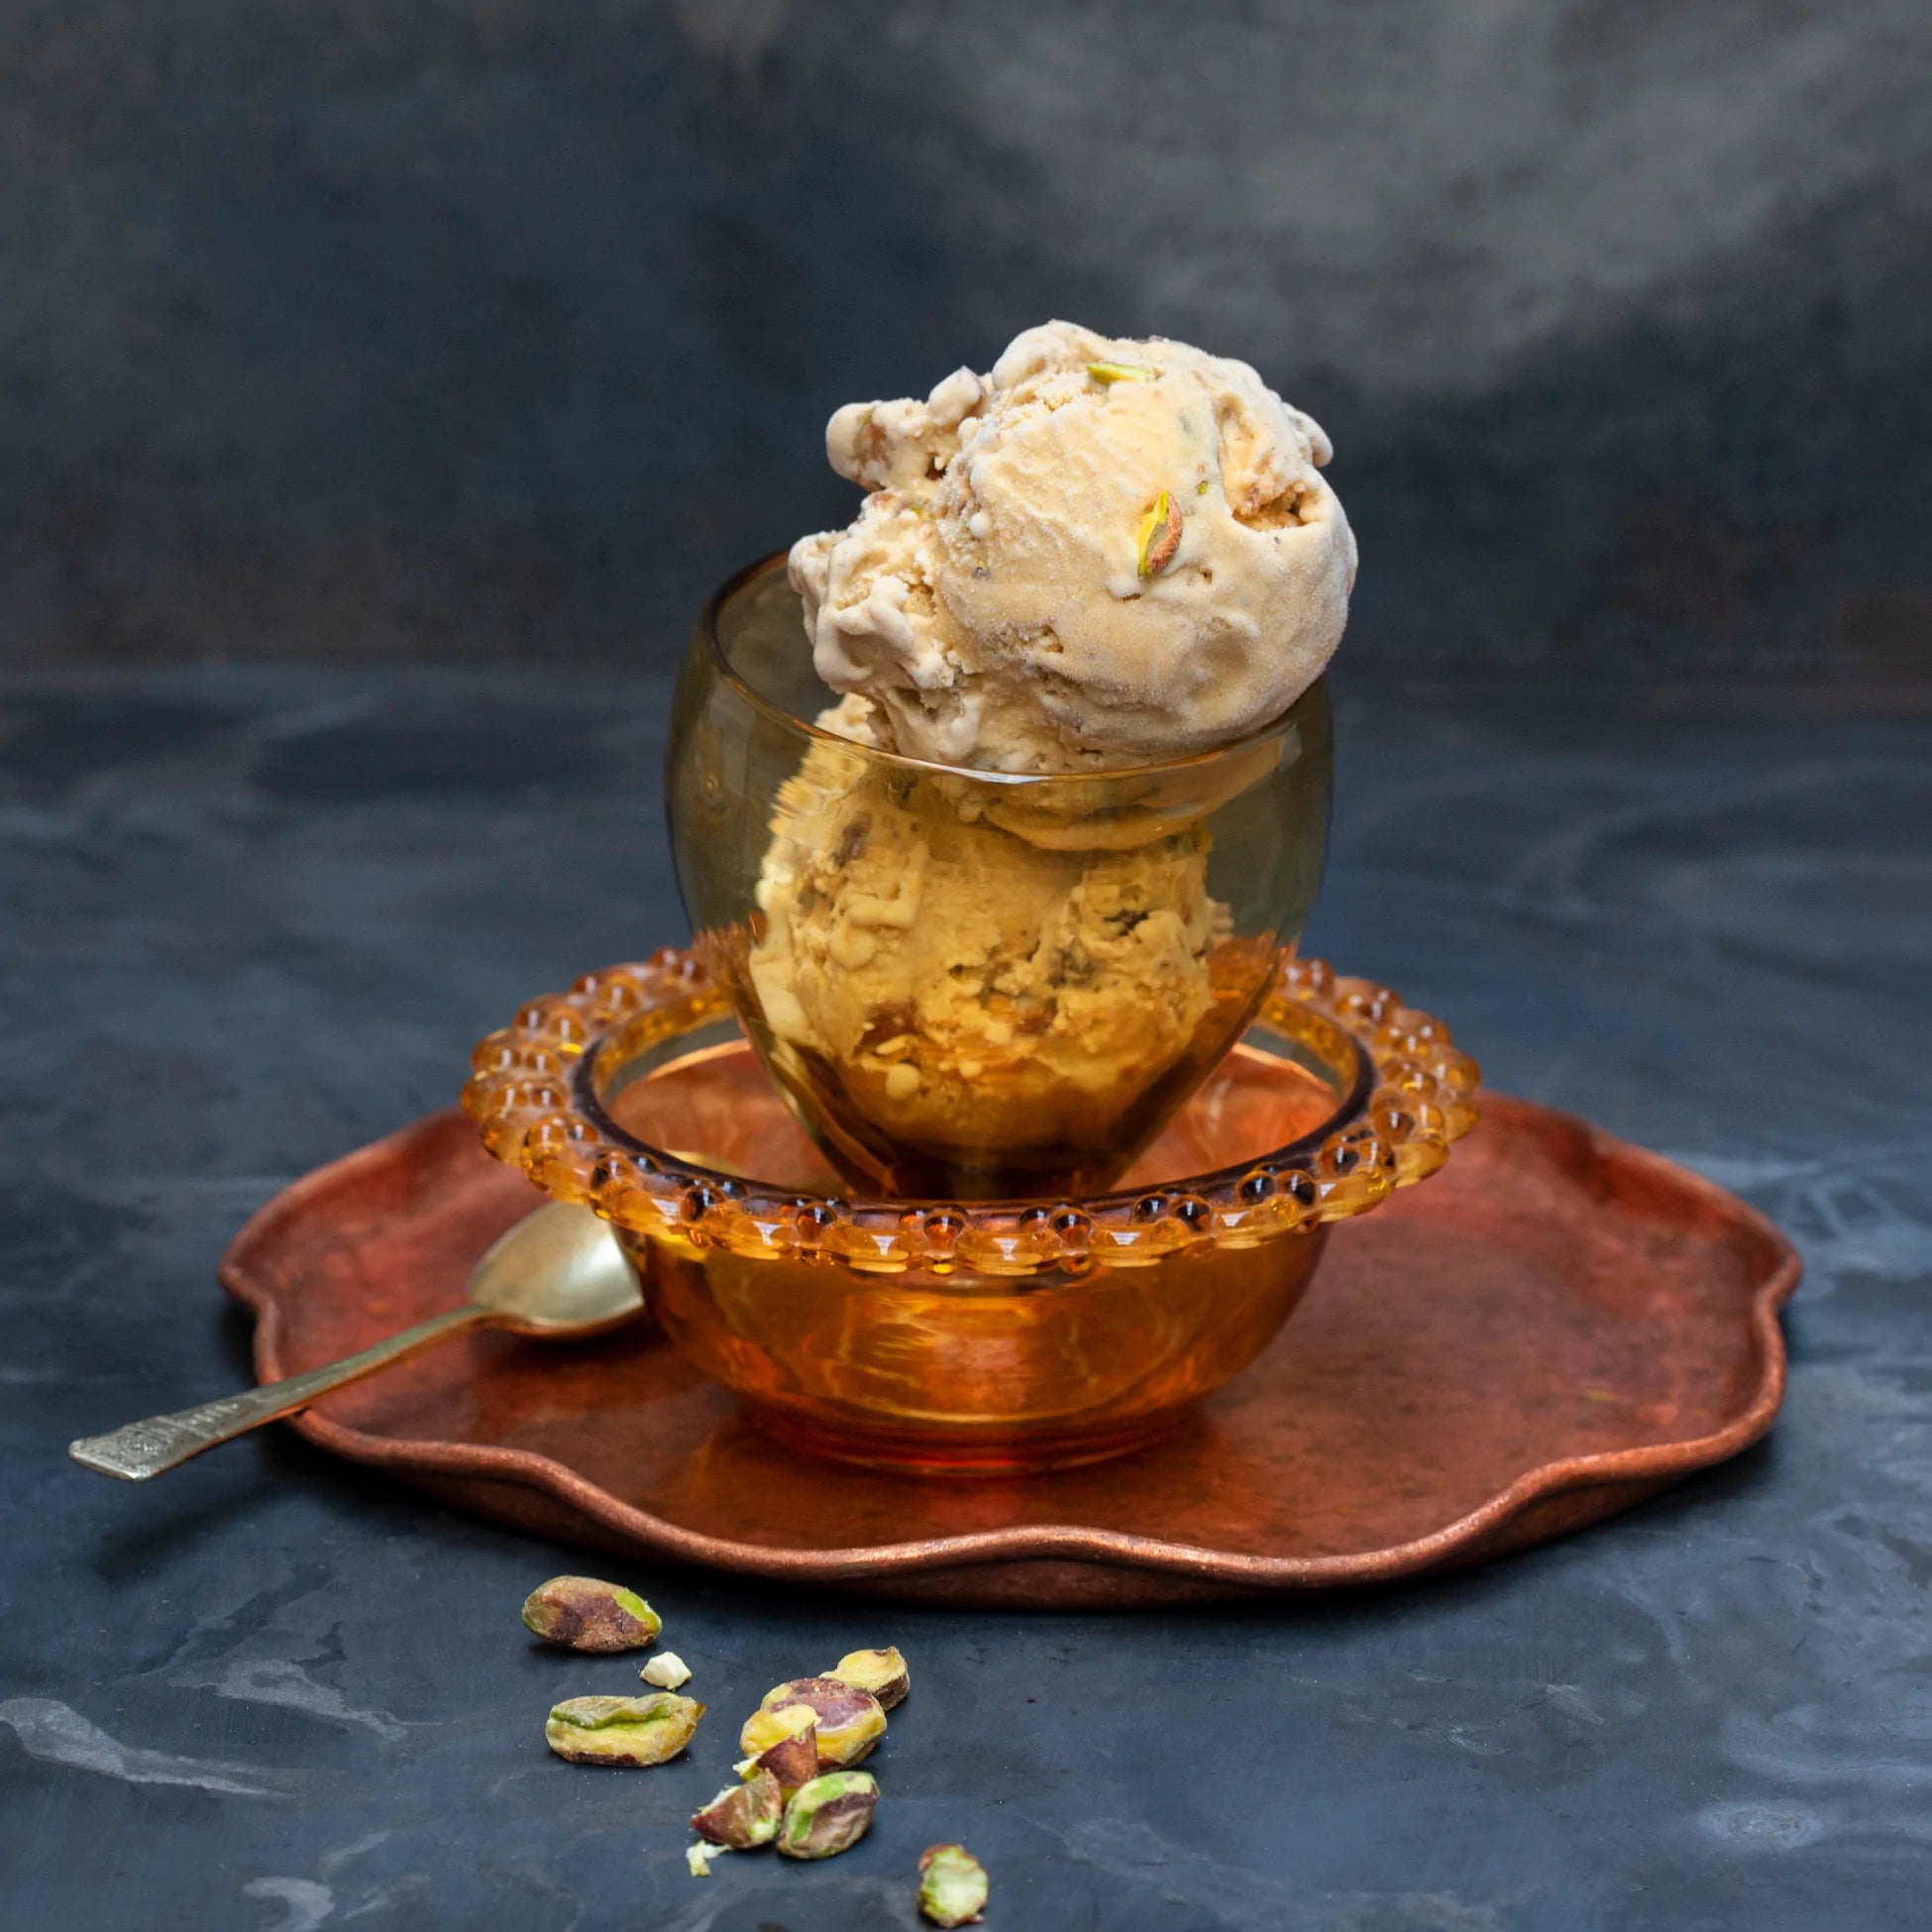 Two scoops of Pistachio ice cream in a glass bowl